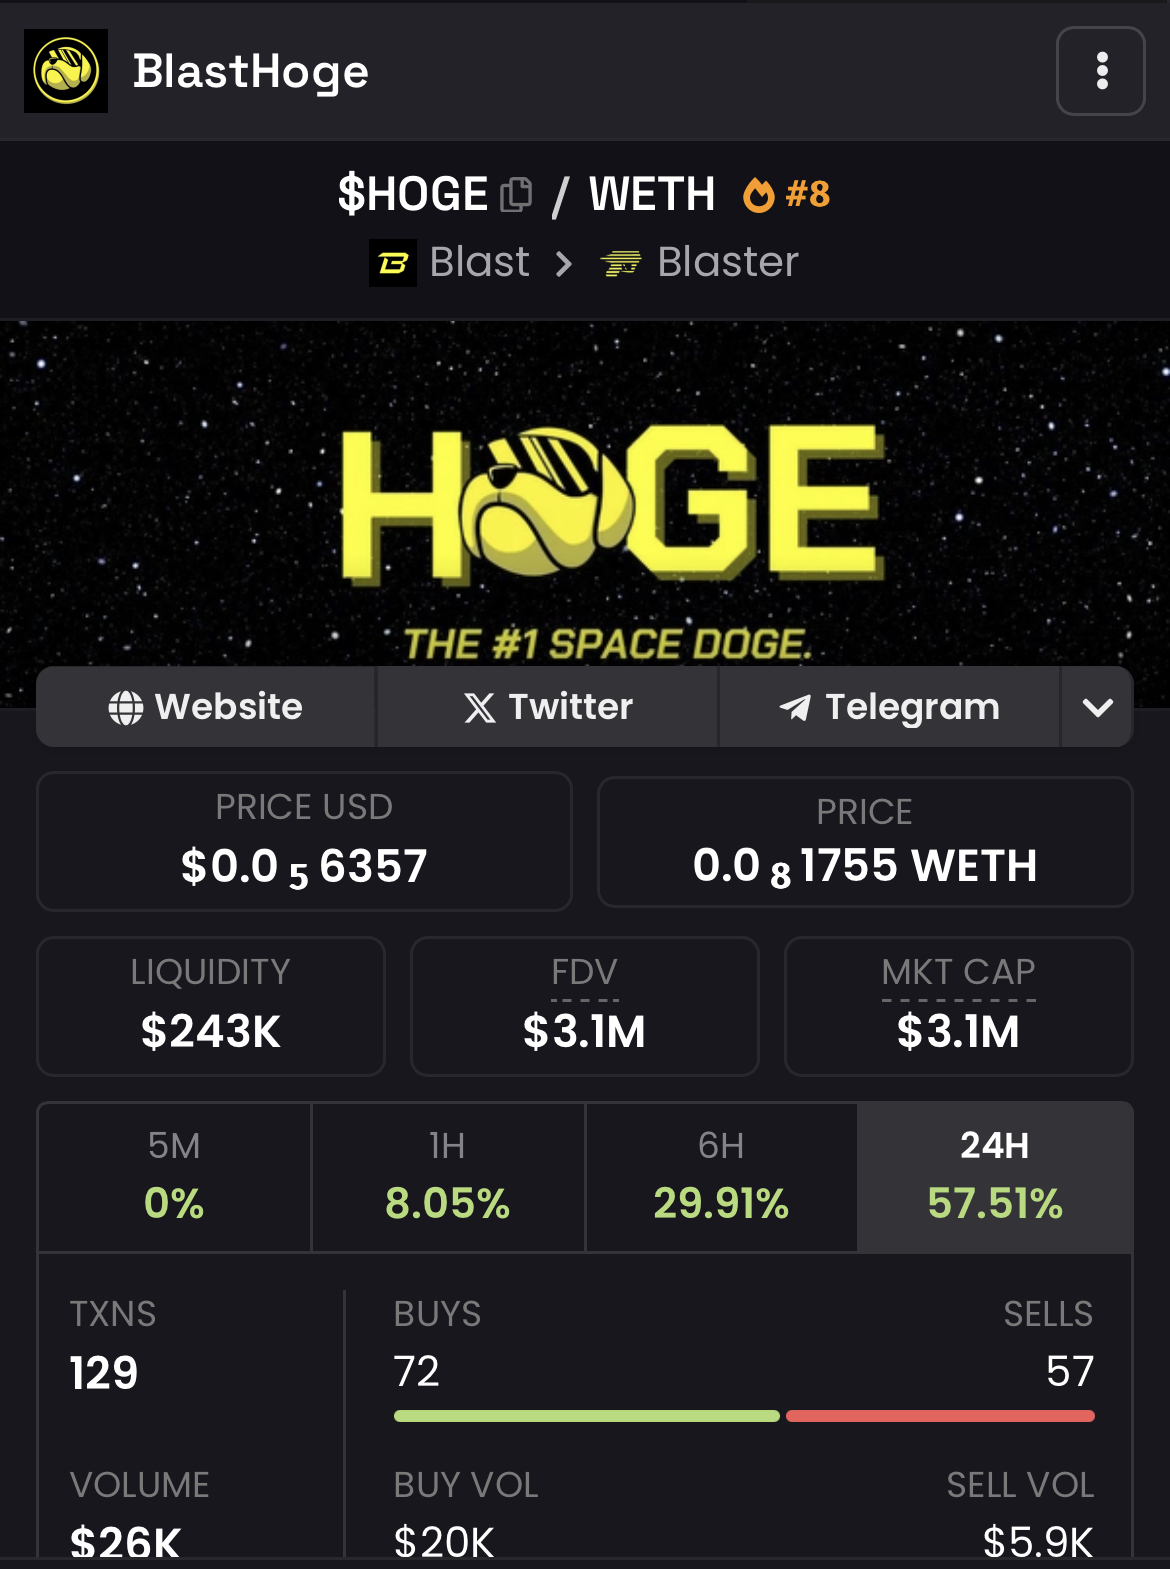 , BLAST HOGE Token Takes the DeFi World by Storm on the Blast Network, Surpasses $3M Market Cap in Just 3 Days